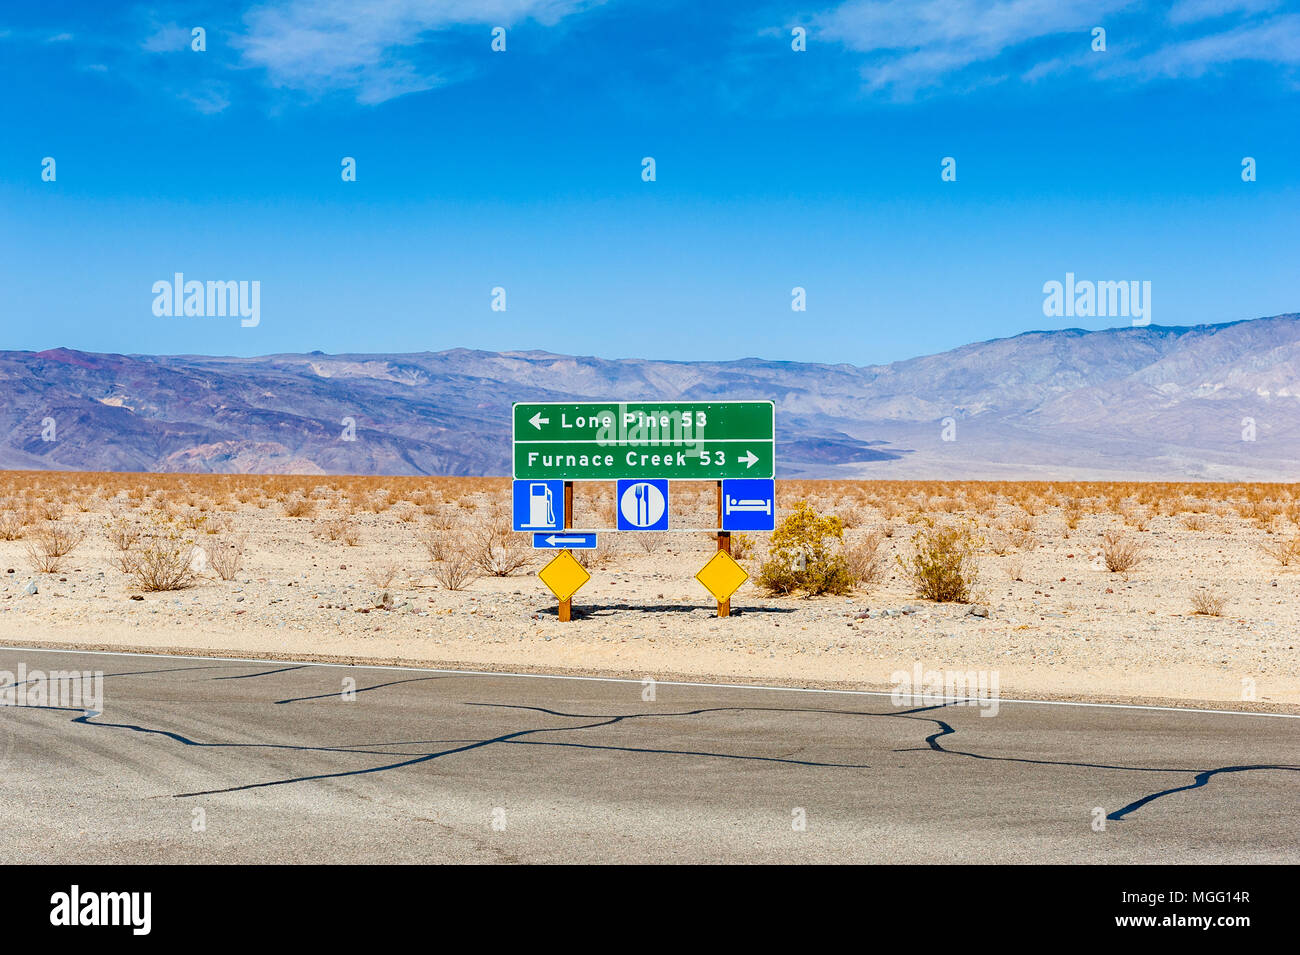 Directional Signs to Lone Pine and Furnace Creek in Death Valley, California, USA Stock Photo